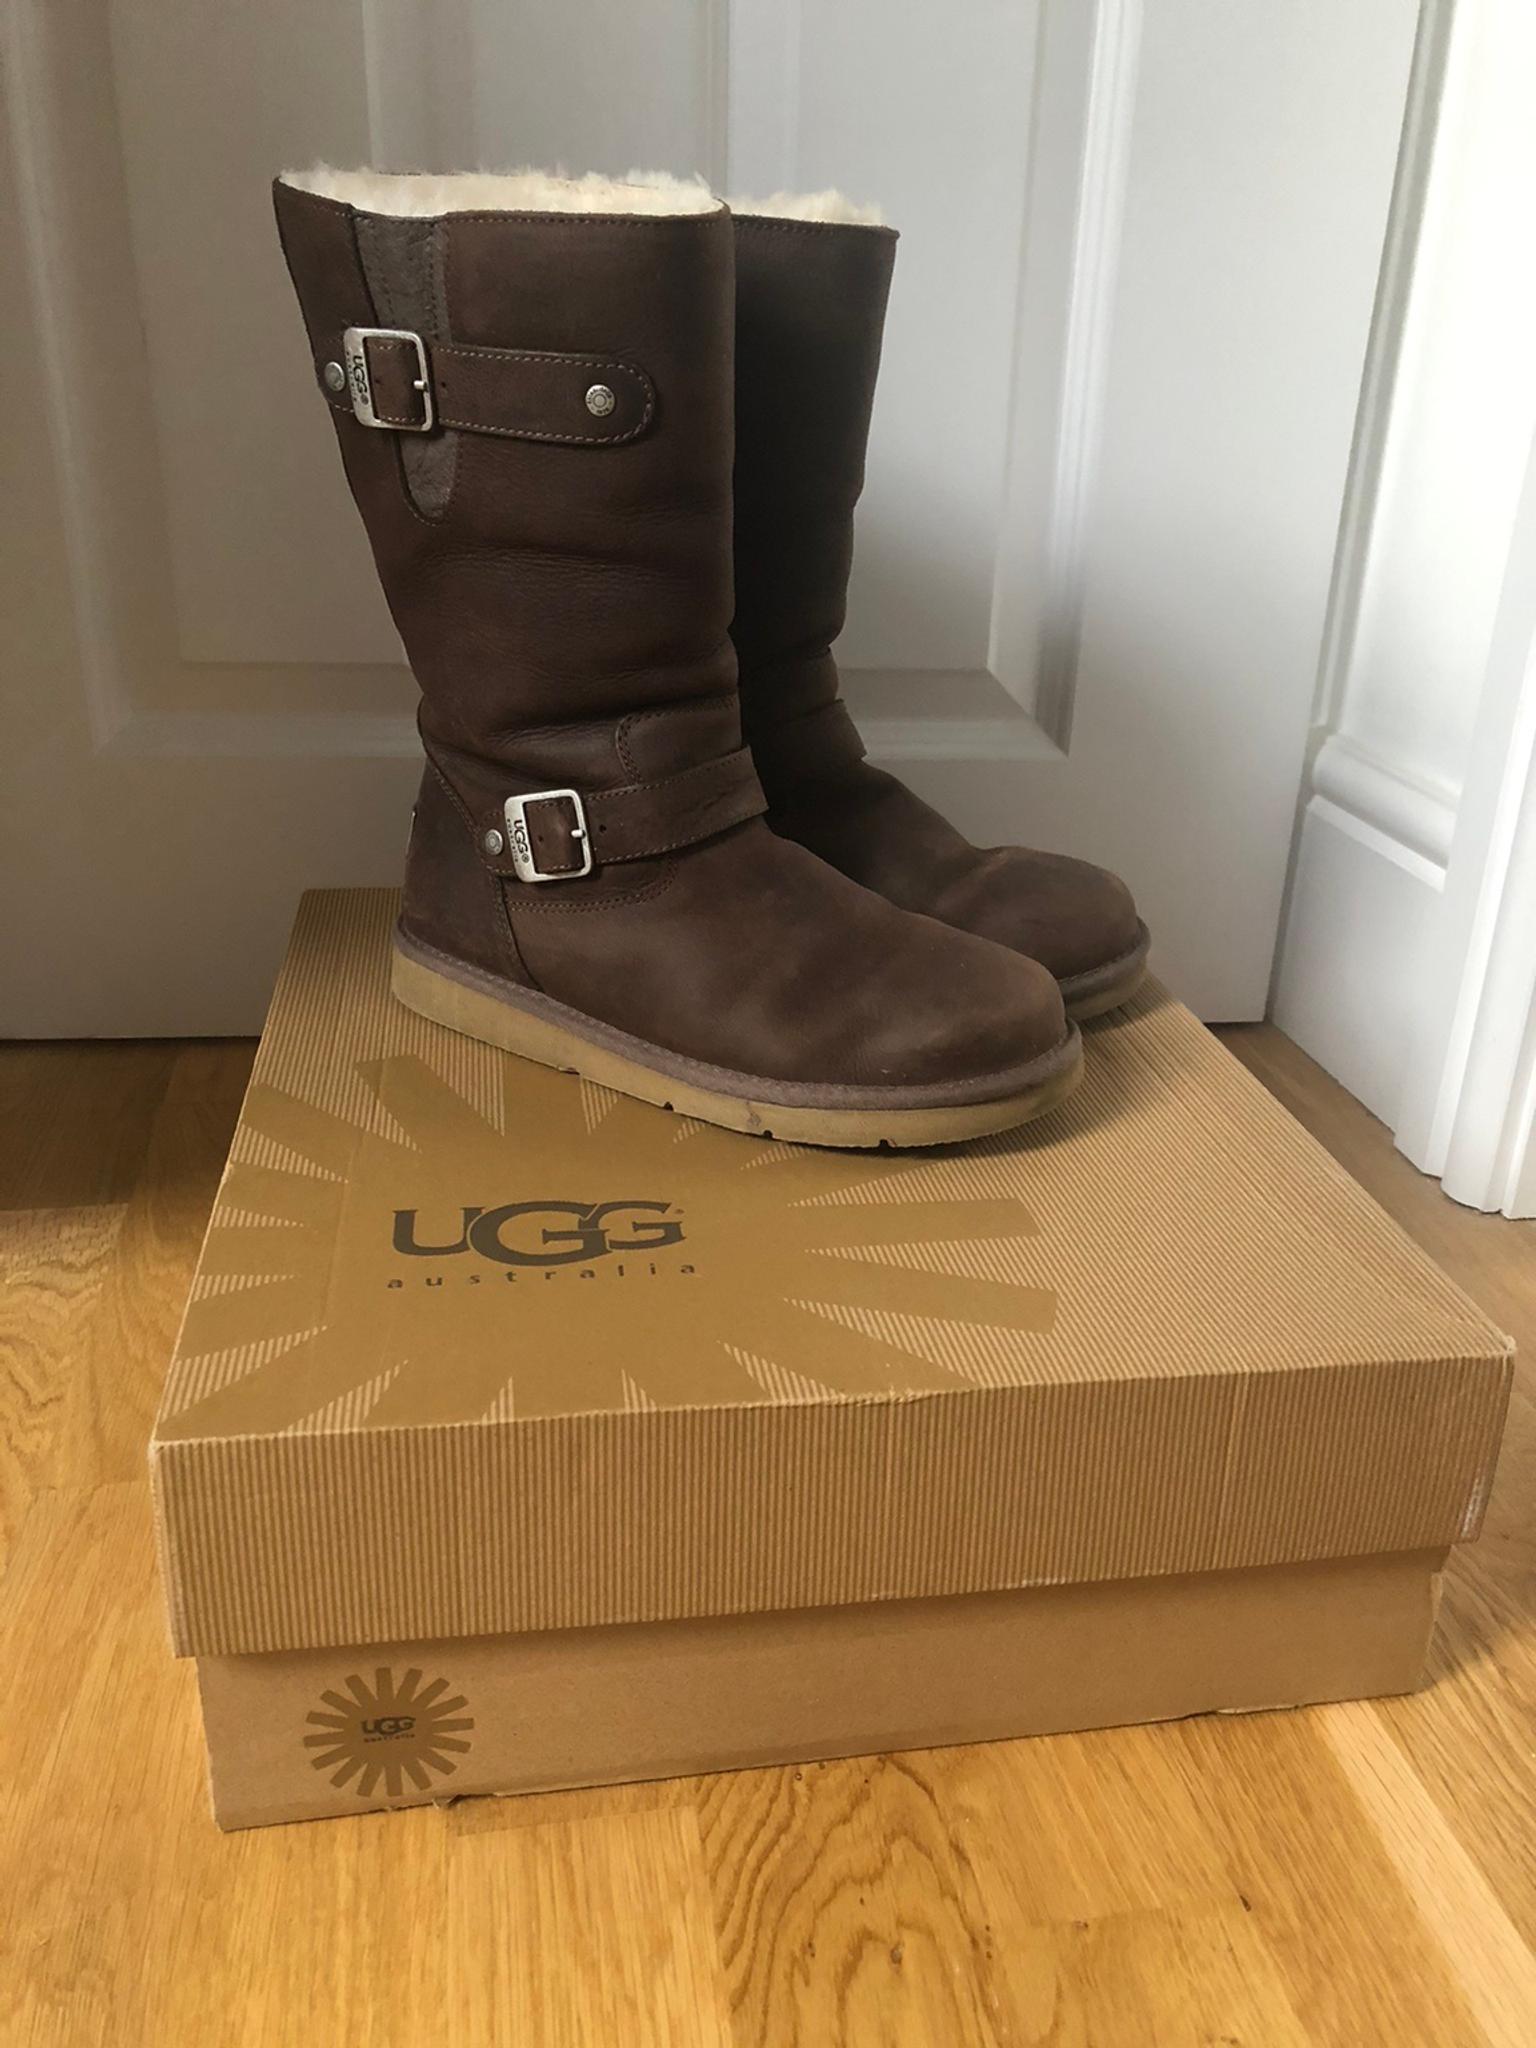 uggs boots size 6.5